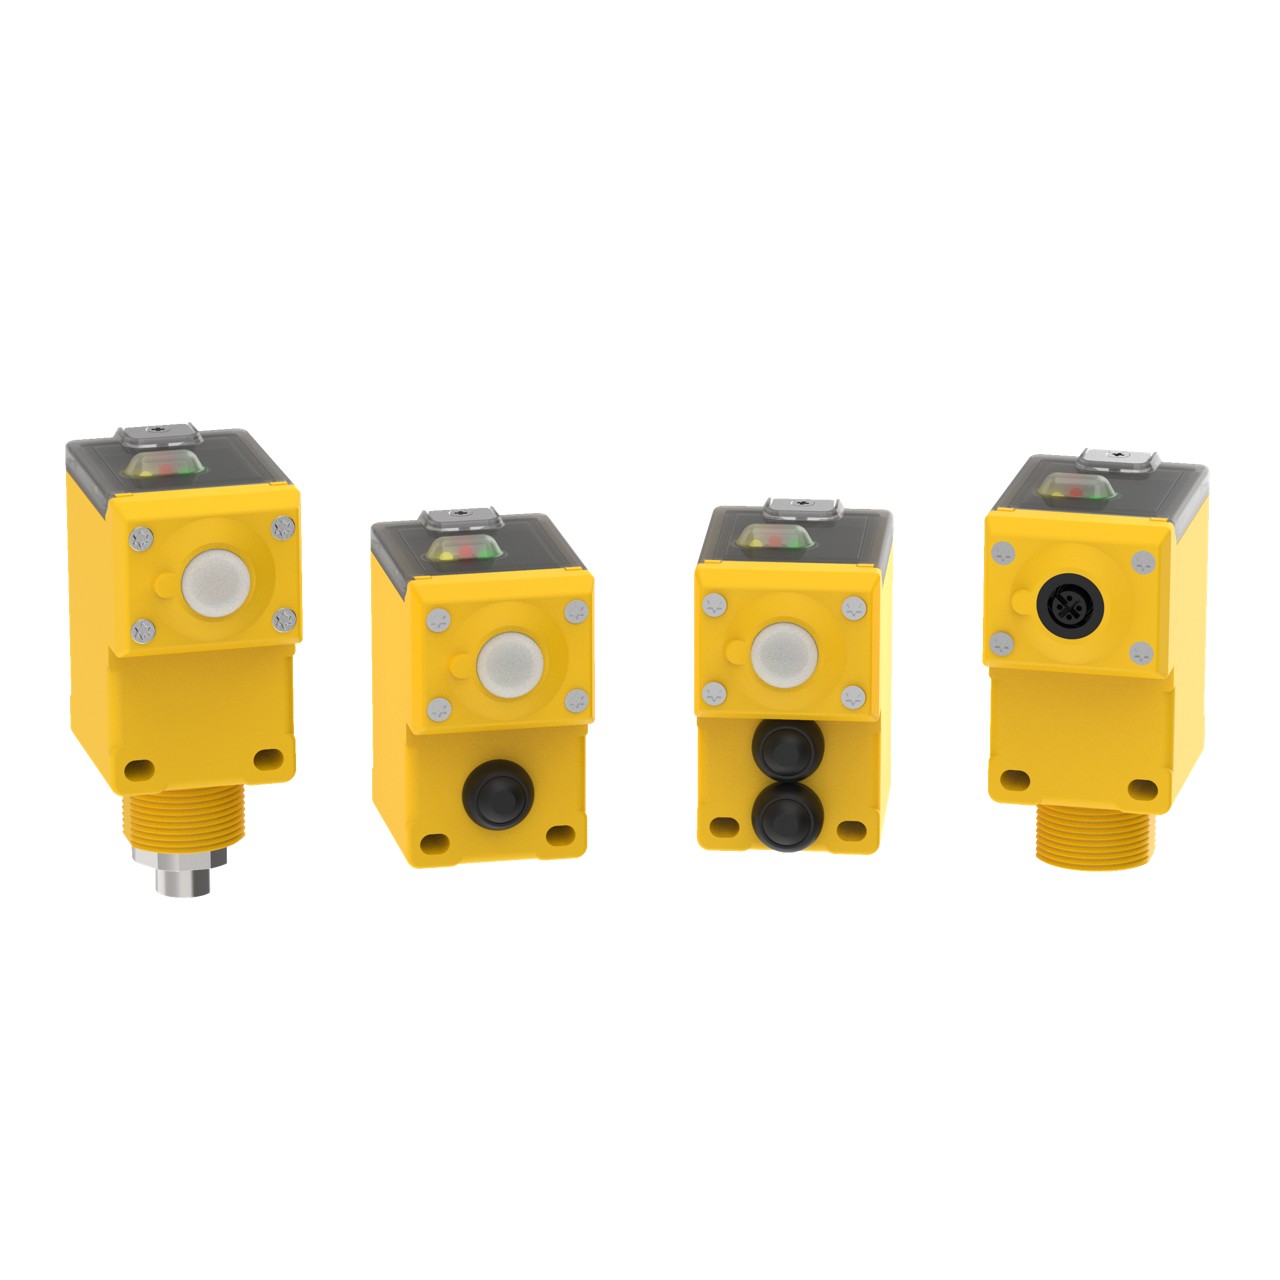 New Q45 Series Wireless Switches and Push Buttons